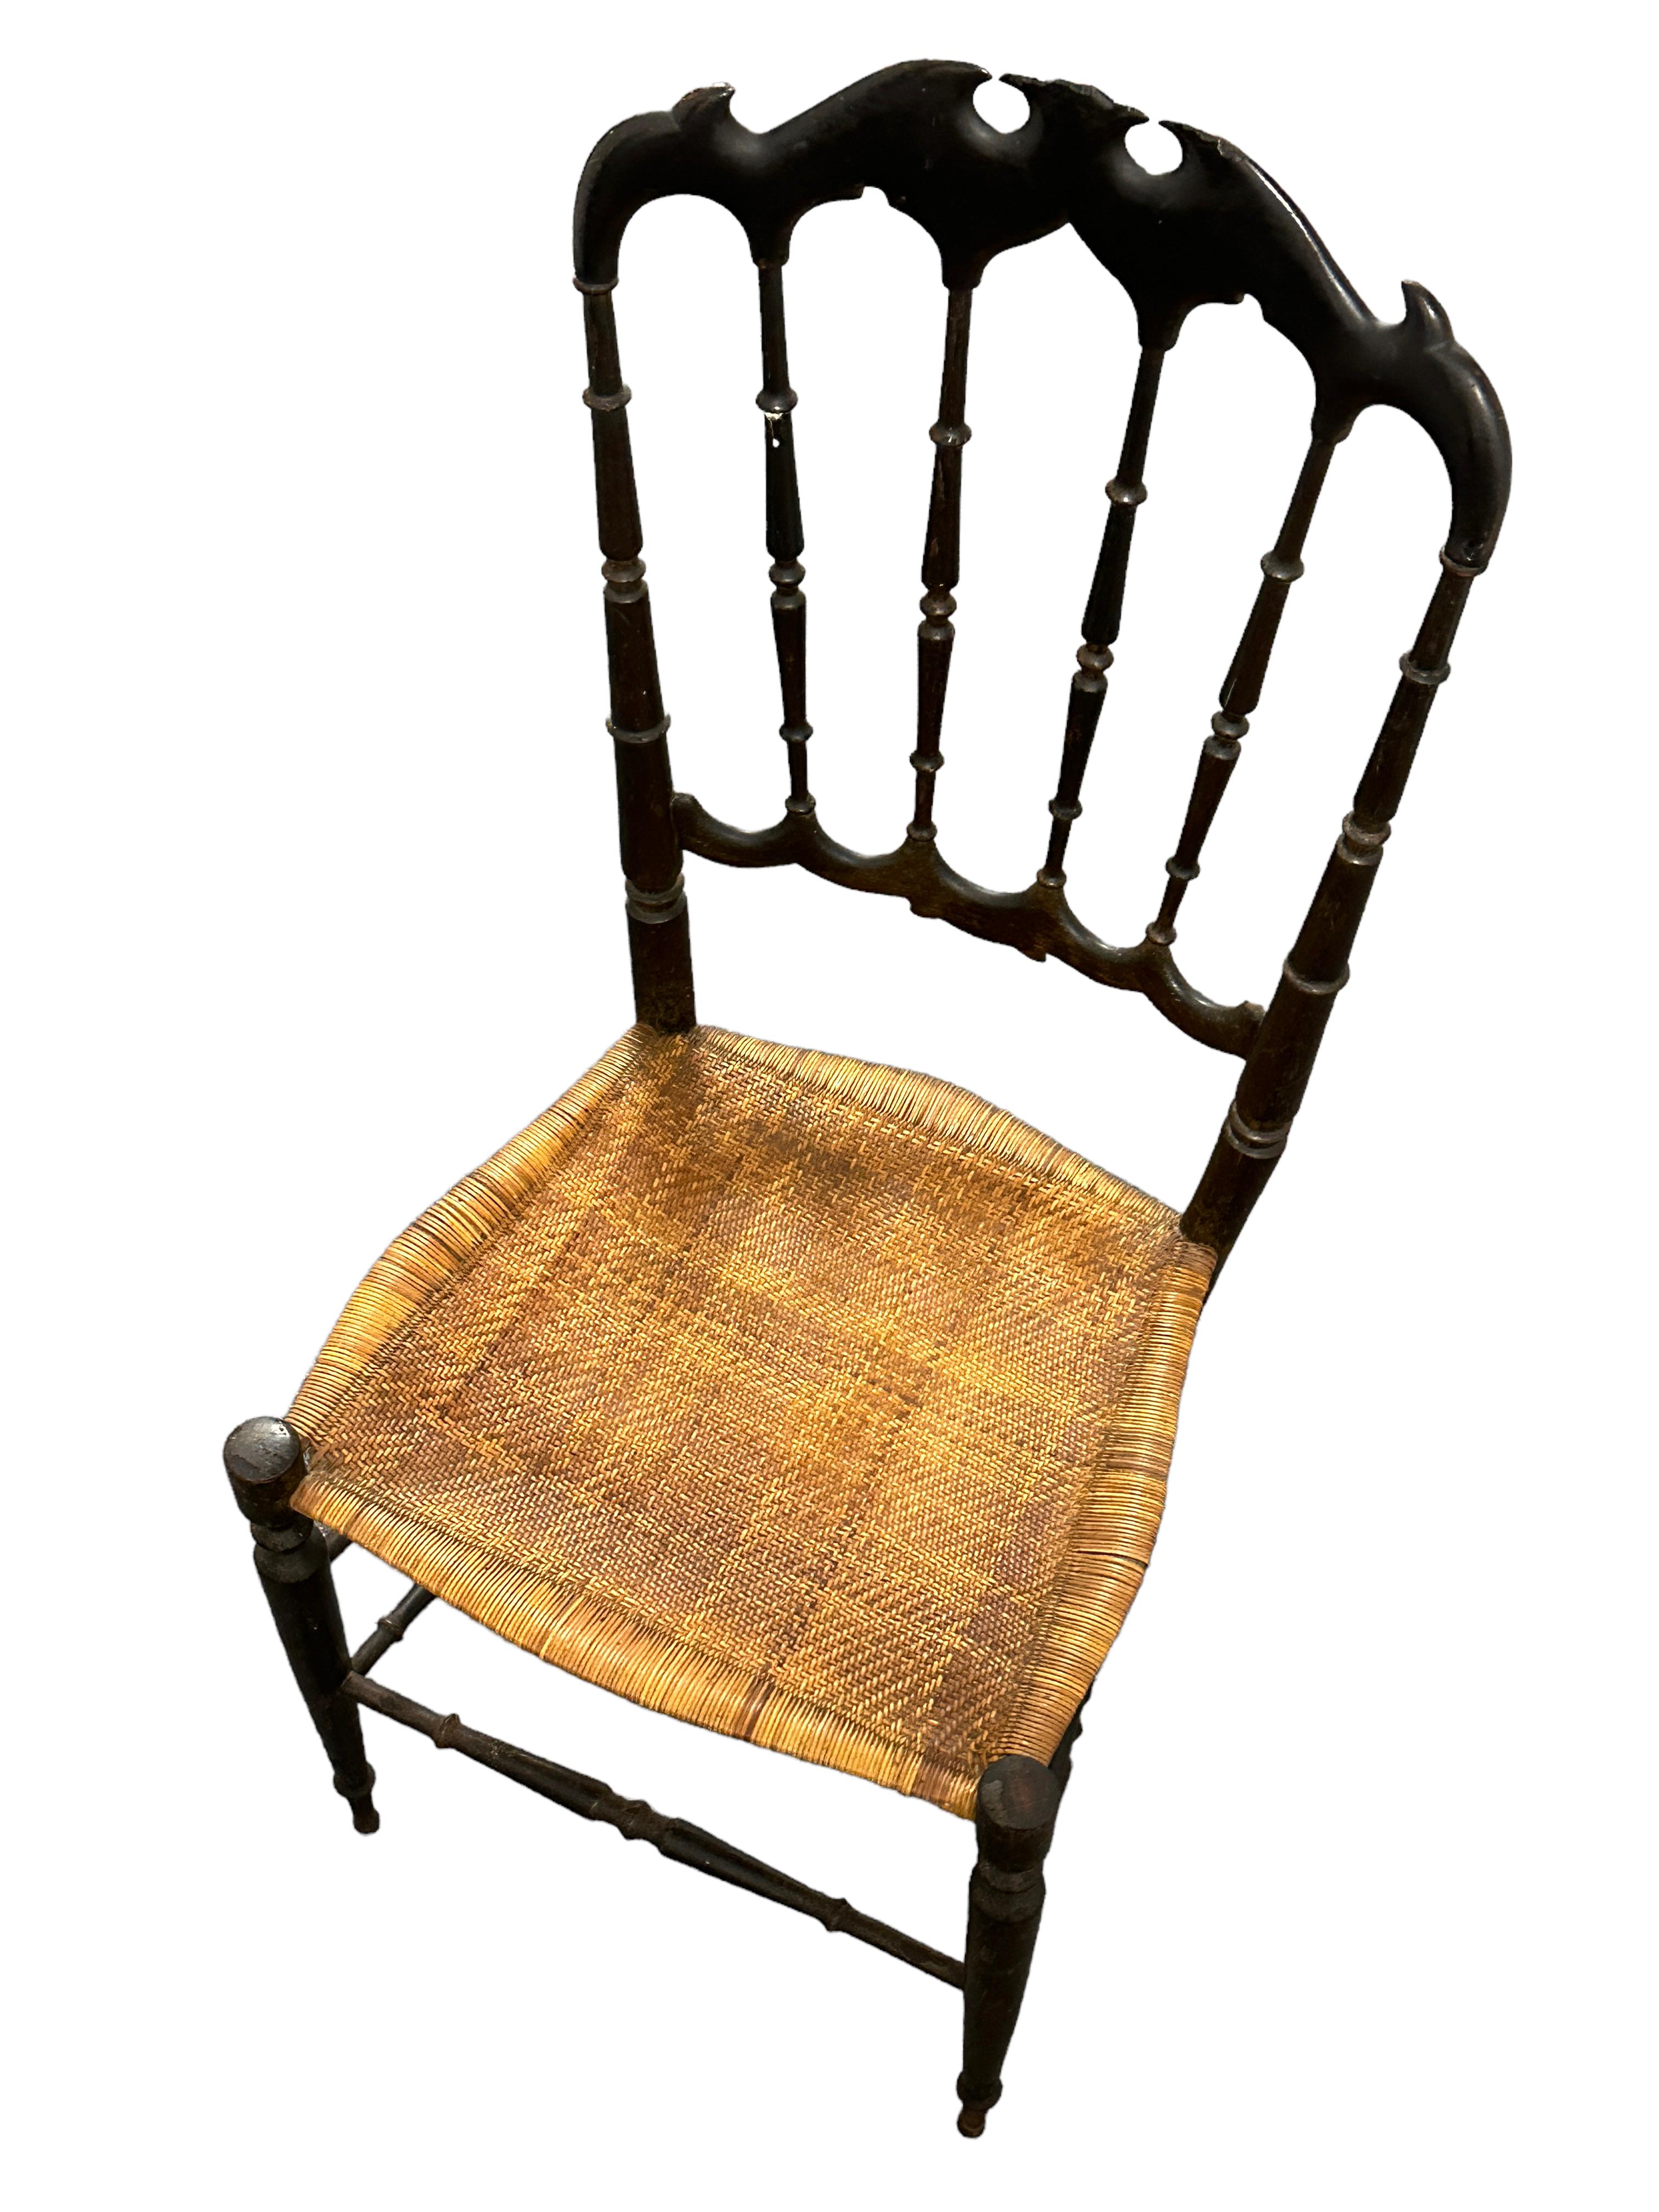 20th Century Beautiful Chiavari Wooden Chair Wicker Seat, Made in Liguria, Italy, 1930s For Sale